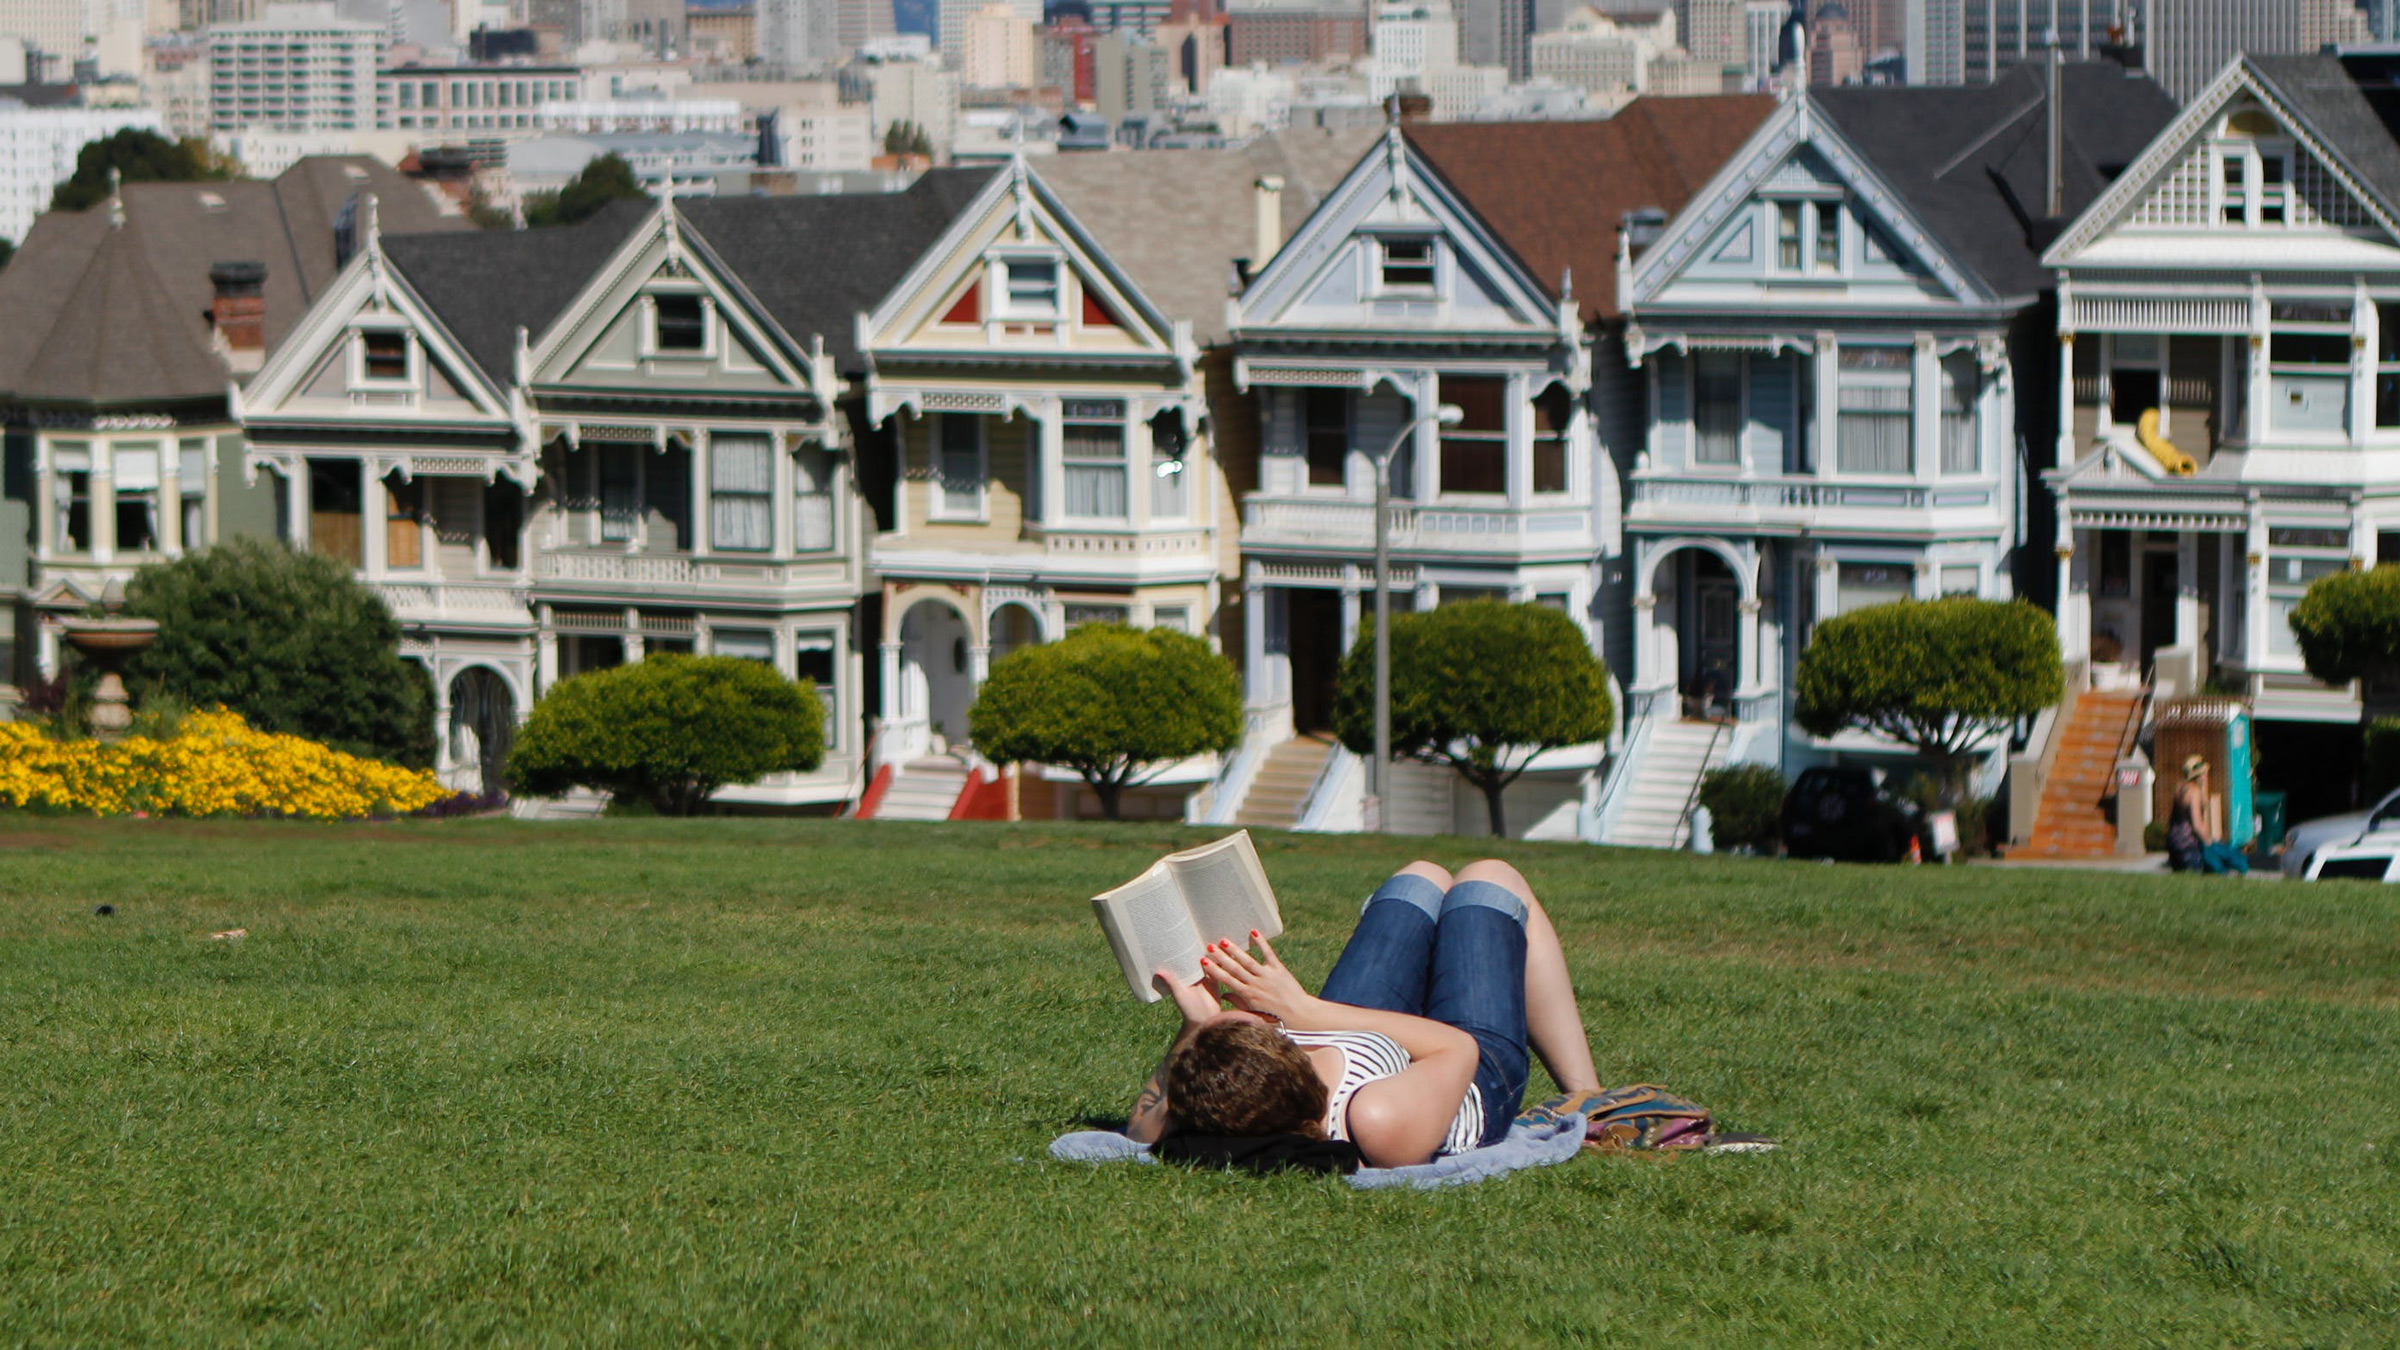 a person reading a book on the lawn in front of a house